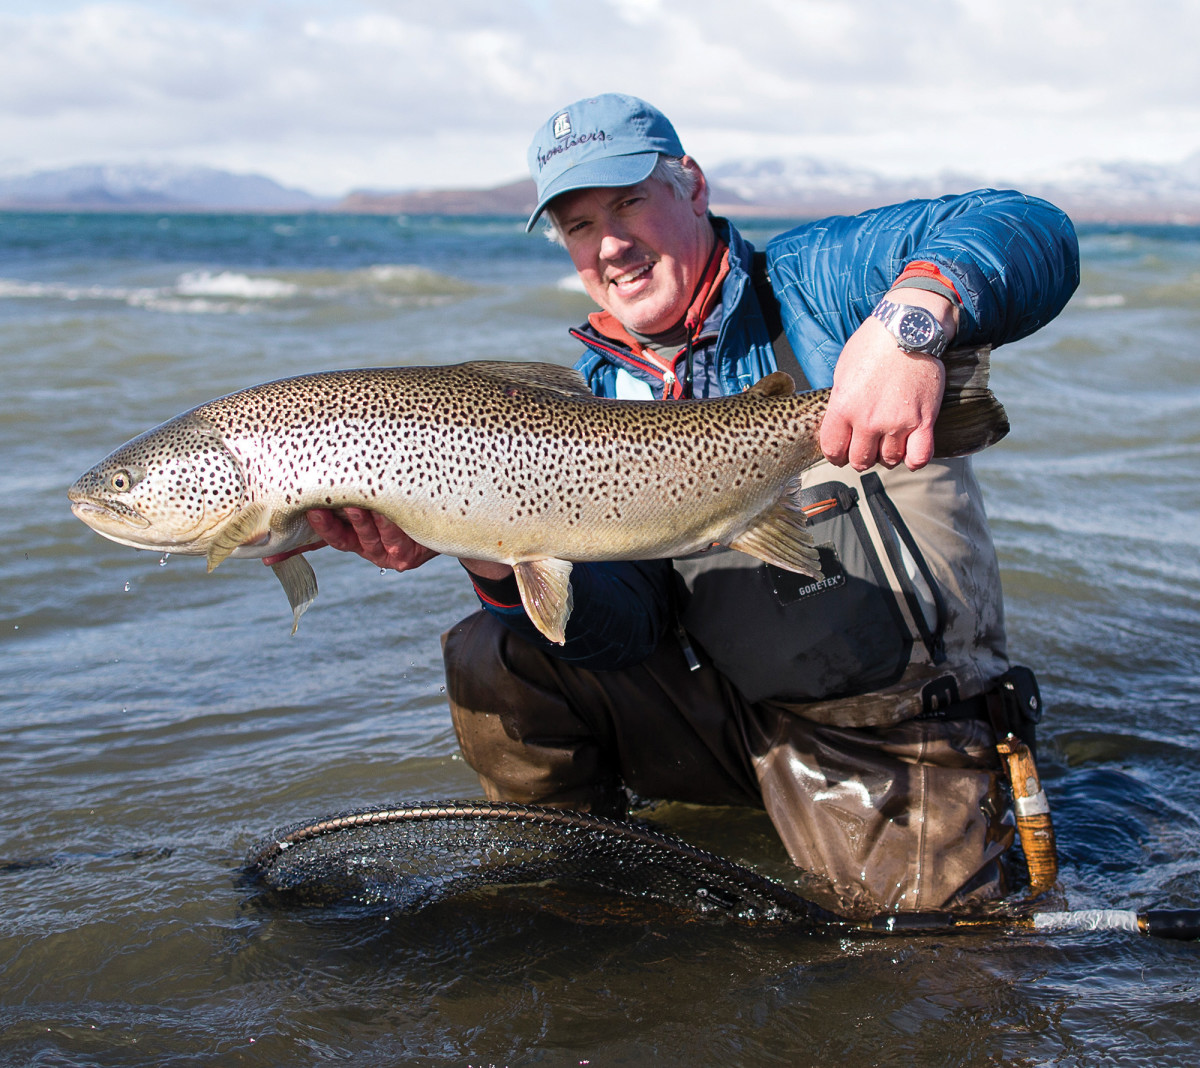 There is no shortage of sizeable brown trout on Lake Thingvallavatn.